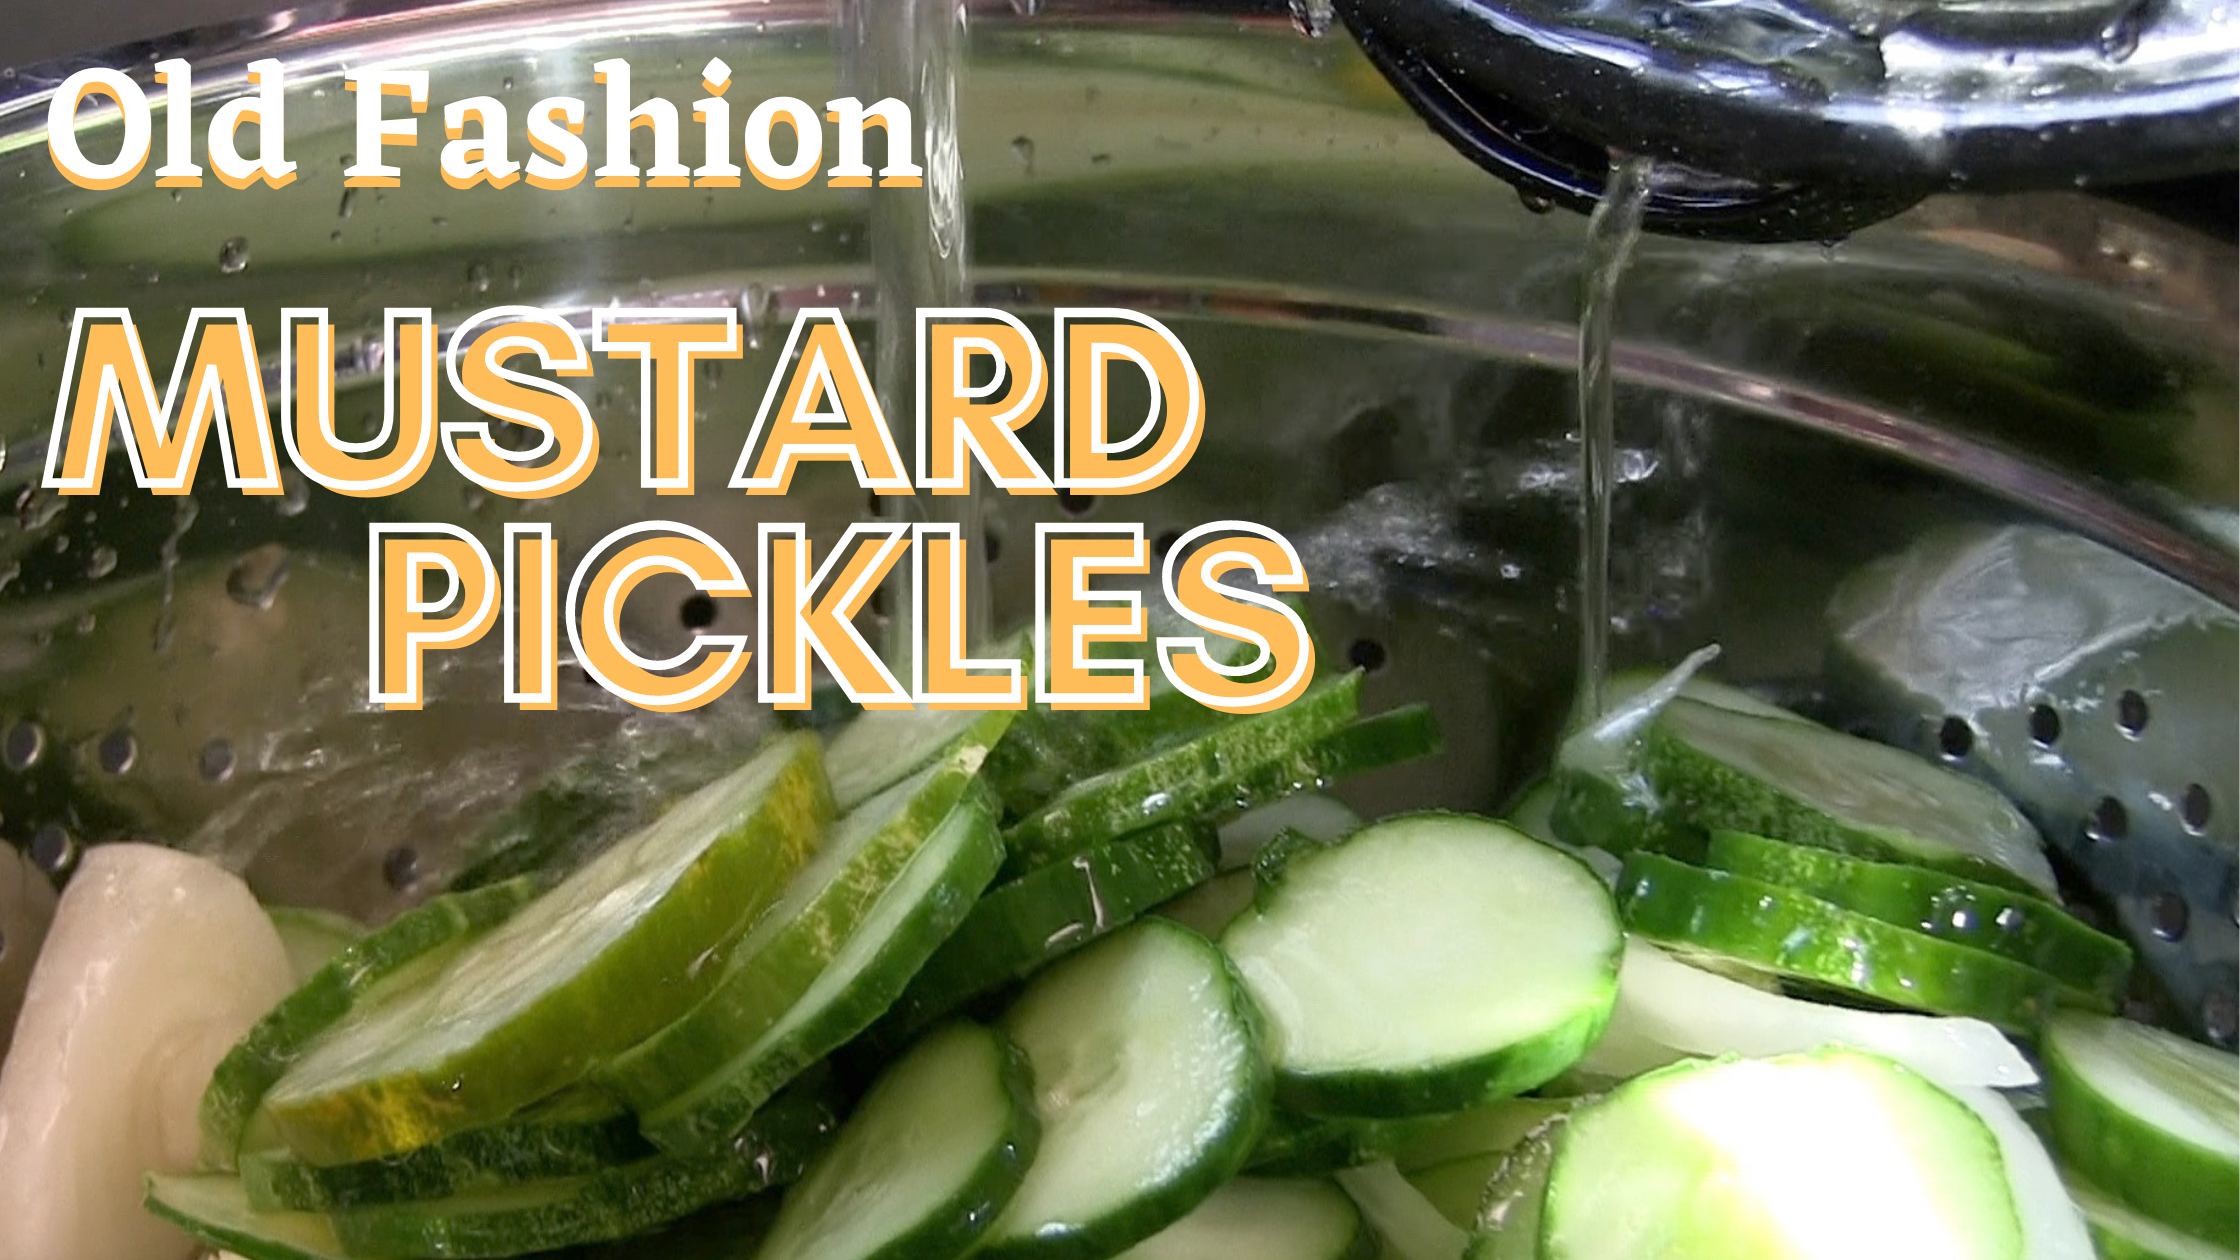 How To Make Old Fashion Mustard Pickles